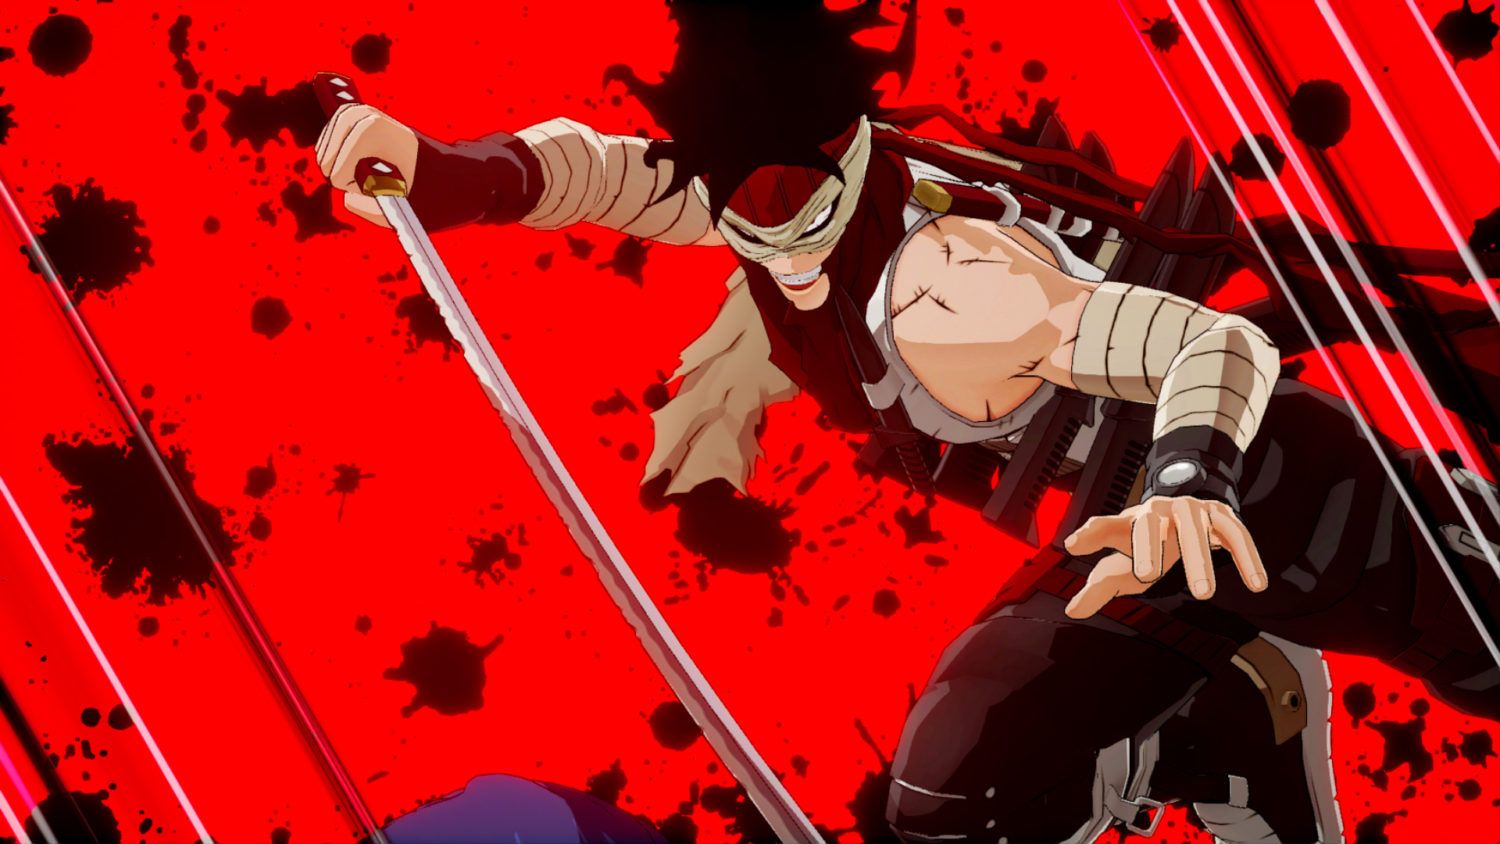 Stain And Aizawa Confirmed For My Hero Academia: One's Justice